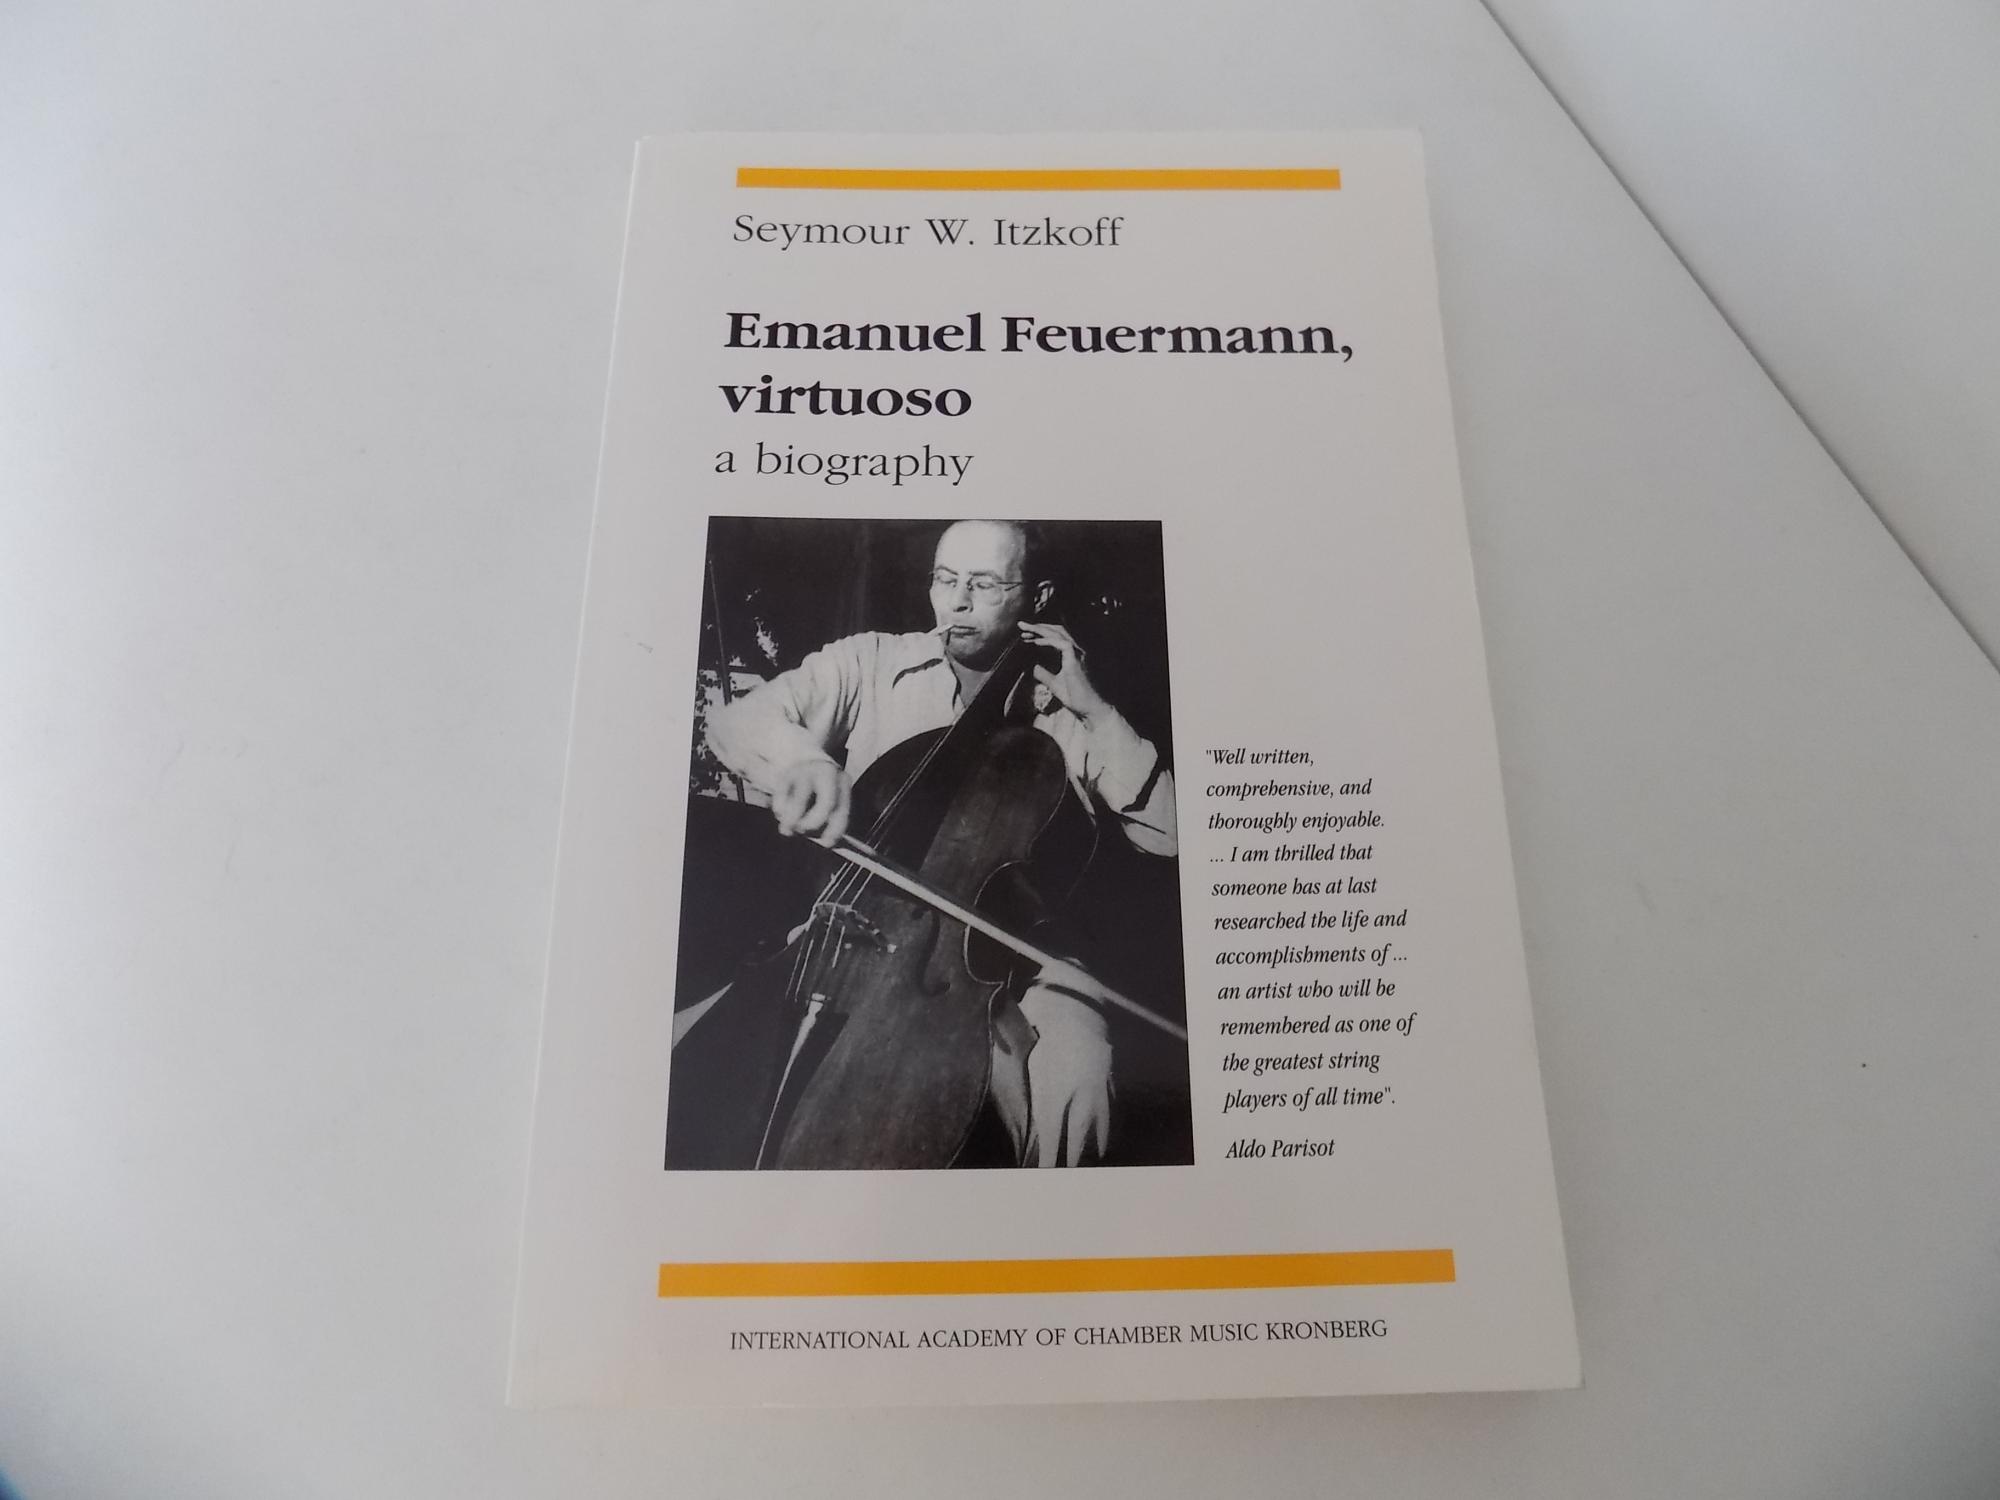 Emanuel Feuermann, Virtuoso. A Biography. With Notes on Interpretation by E. Feuermann and a Discography of Feuermann Recordings by Fred Calland and S. W. Itzkoff. Second edition. With photographs. - Itzkoff, Seymour W.